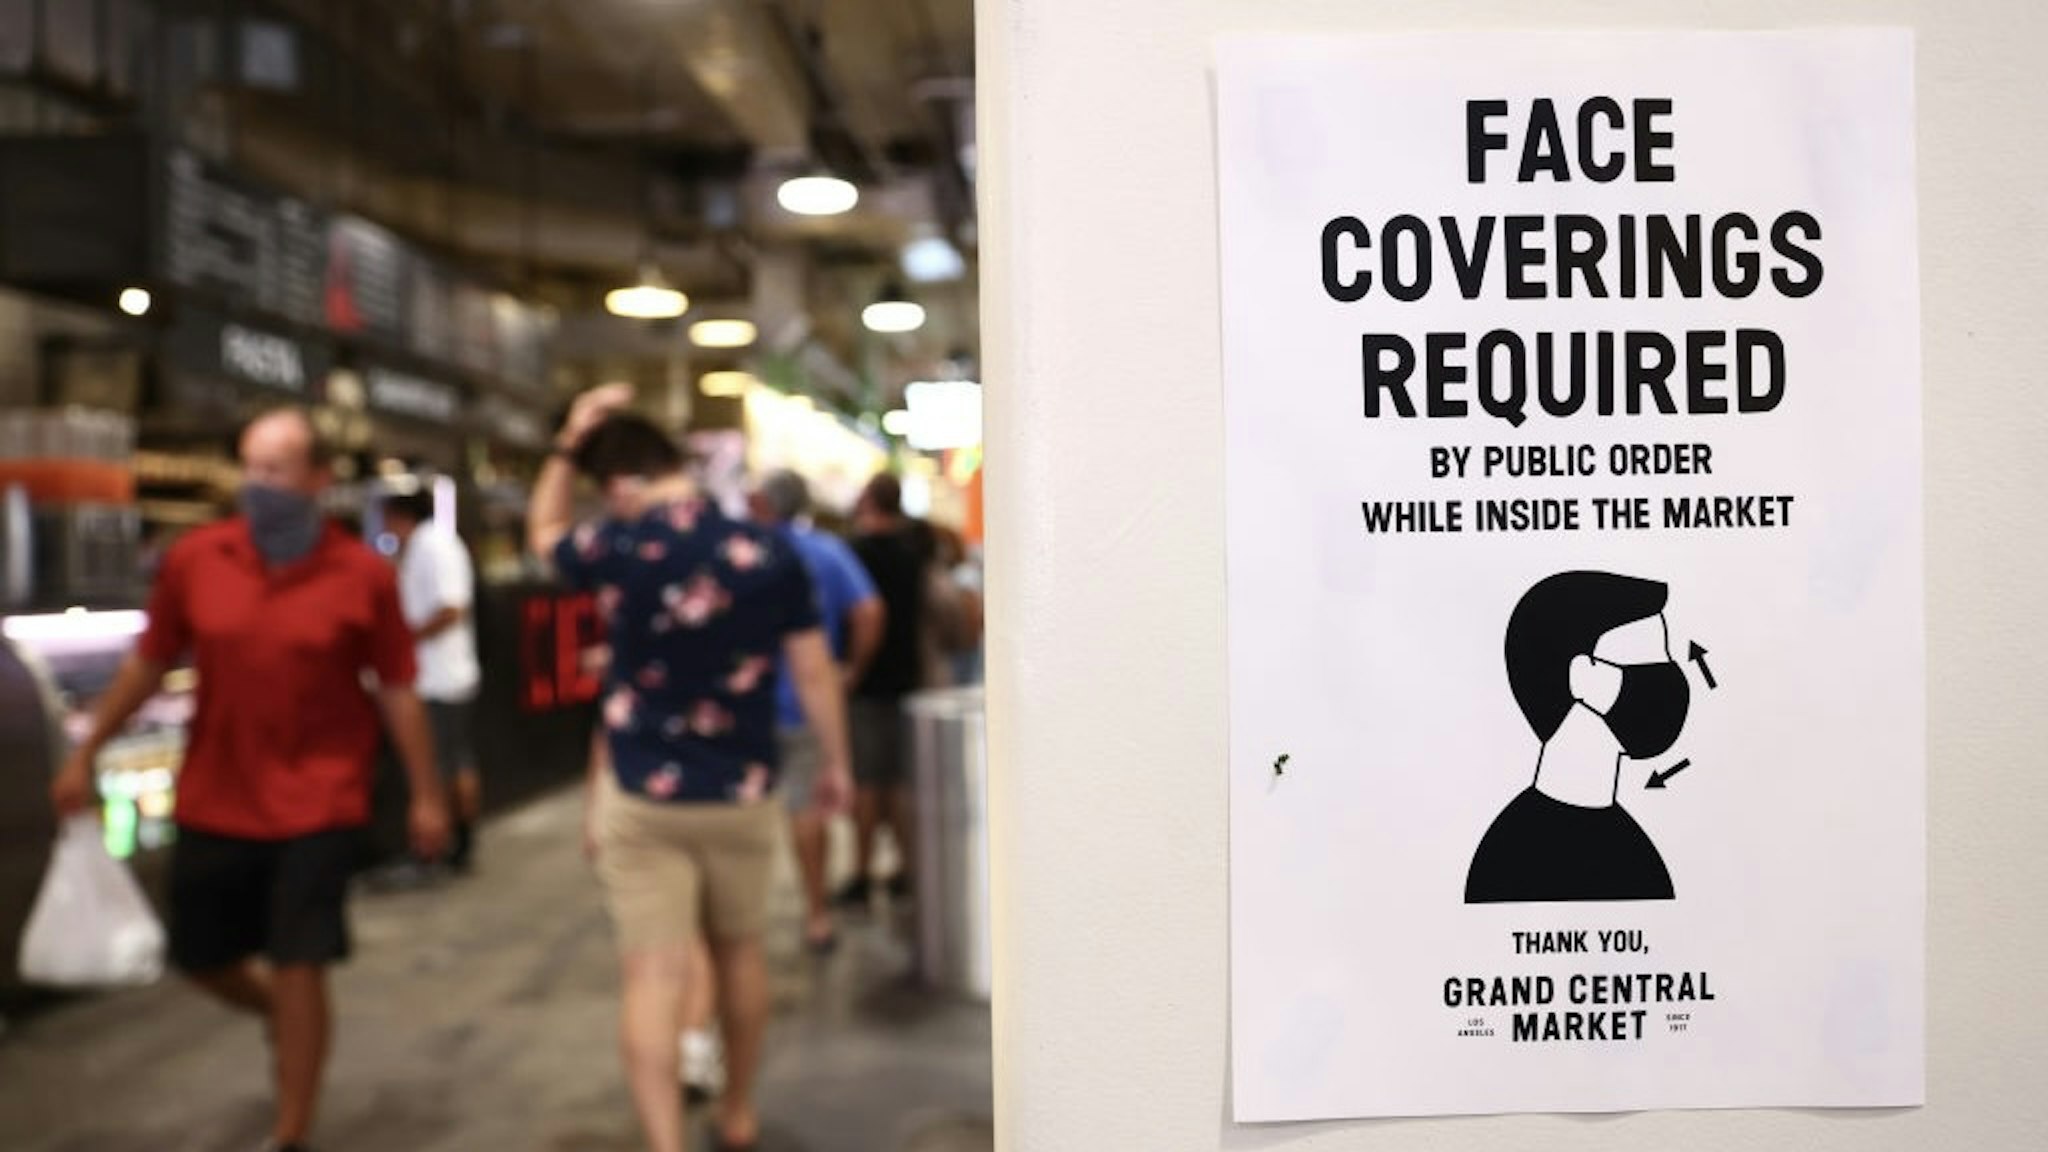 Los Angeles County Makes Masks Mandatory Again Inside As COVID Cases Rise LOS ANGELES, CALIFORNIA - JULY 19: A sign is posted about required face coverings in Grand Central Market on July 19, 2021 in Los Angeles, California. A new mask mandate went into effect just before midnight on July 17th in Los Angeles County requiring all people, regardless of vaccination status, to wear a face covering in public indoor spaces amid a troubling rise in COVID-19 cases. (Photo by Mario Tama/Getty Images) Mario Tama / Staff